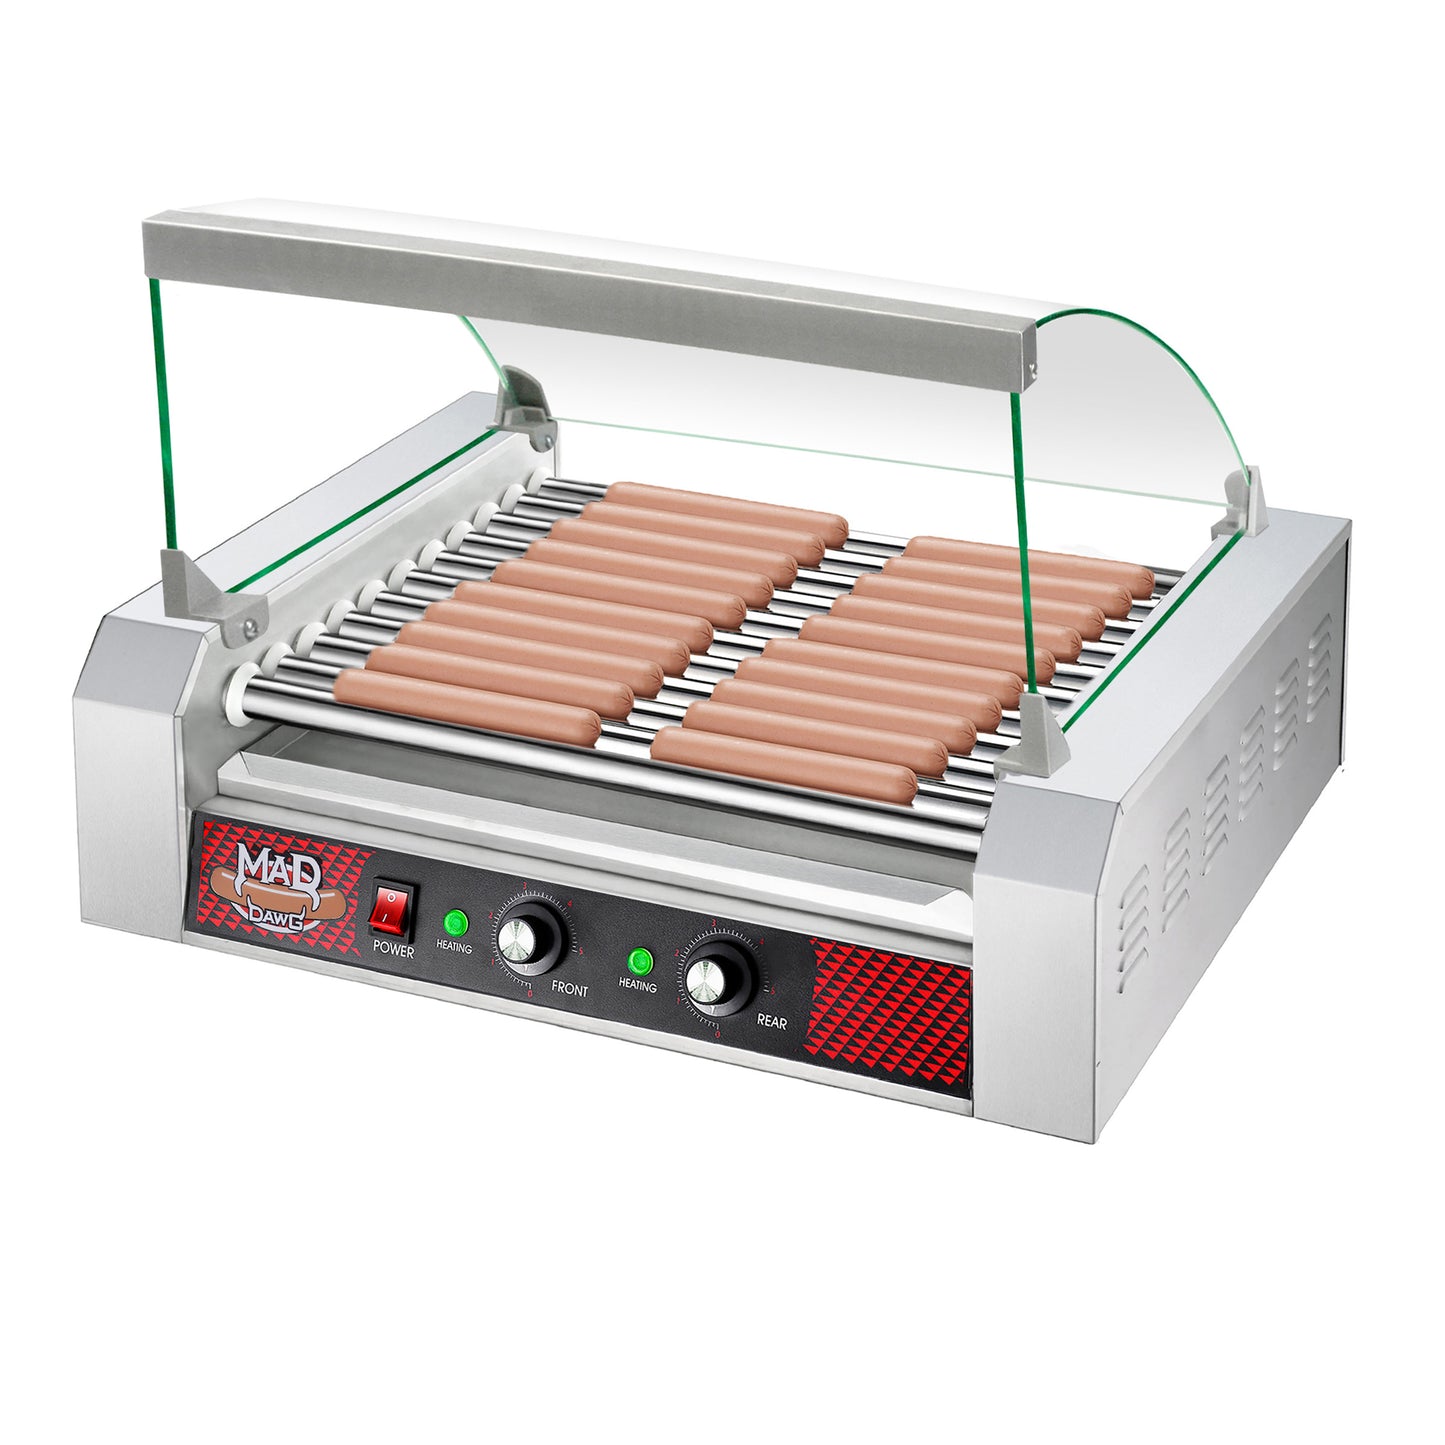 30 Hot Dog 11 Roller Hot Dog Machine with Tempered Glass Cover